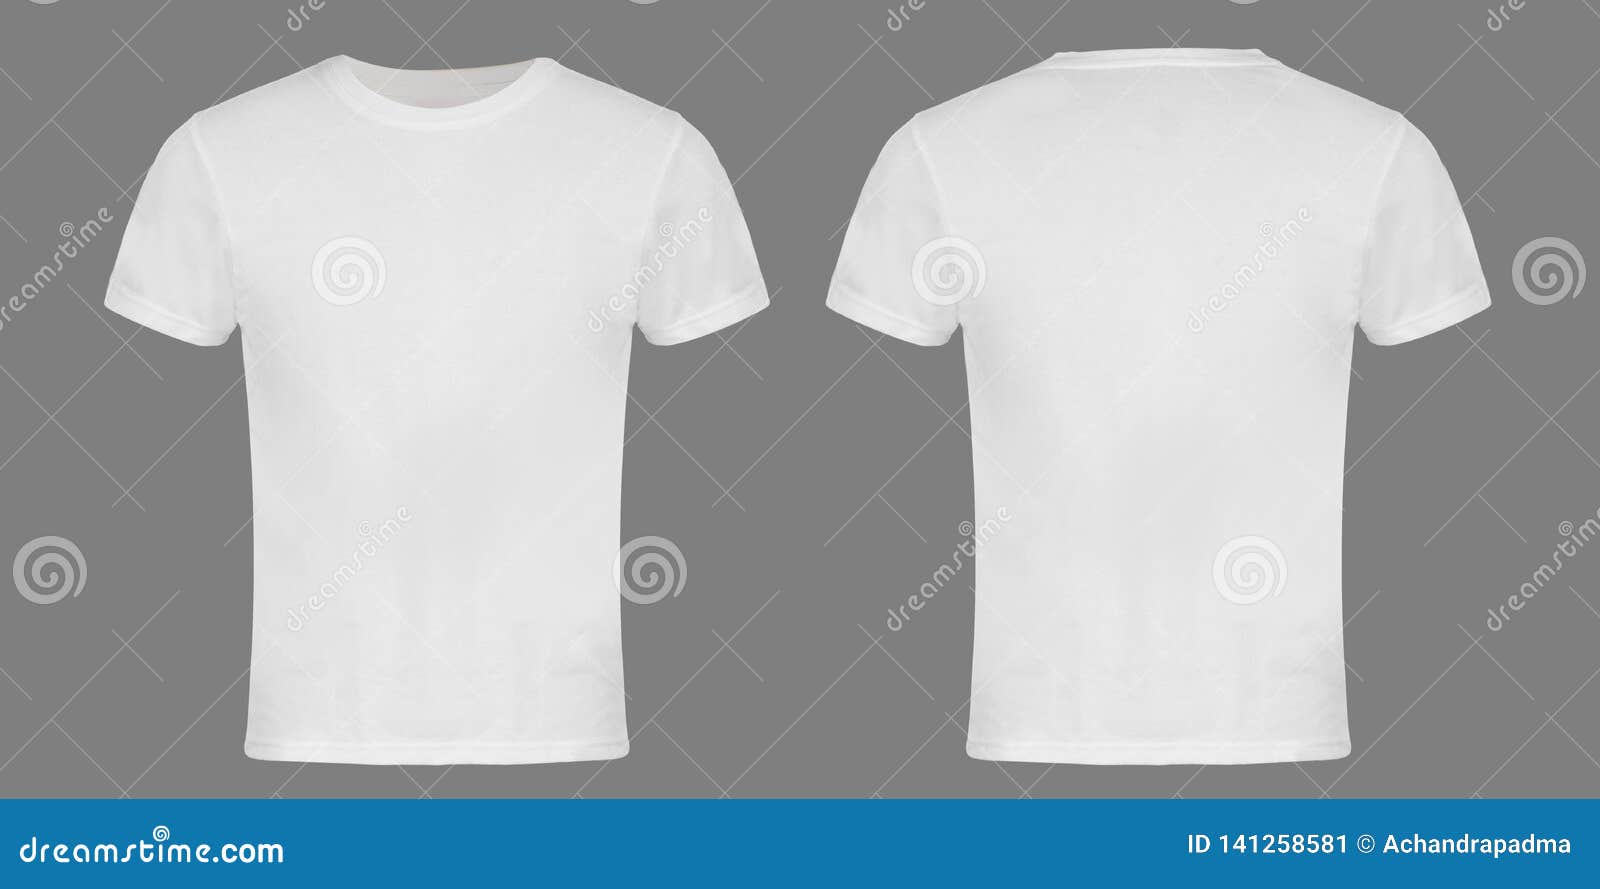 White Blank T-shirt Front and Back Stock Image - Image of design, shape:  141258581